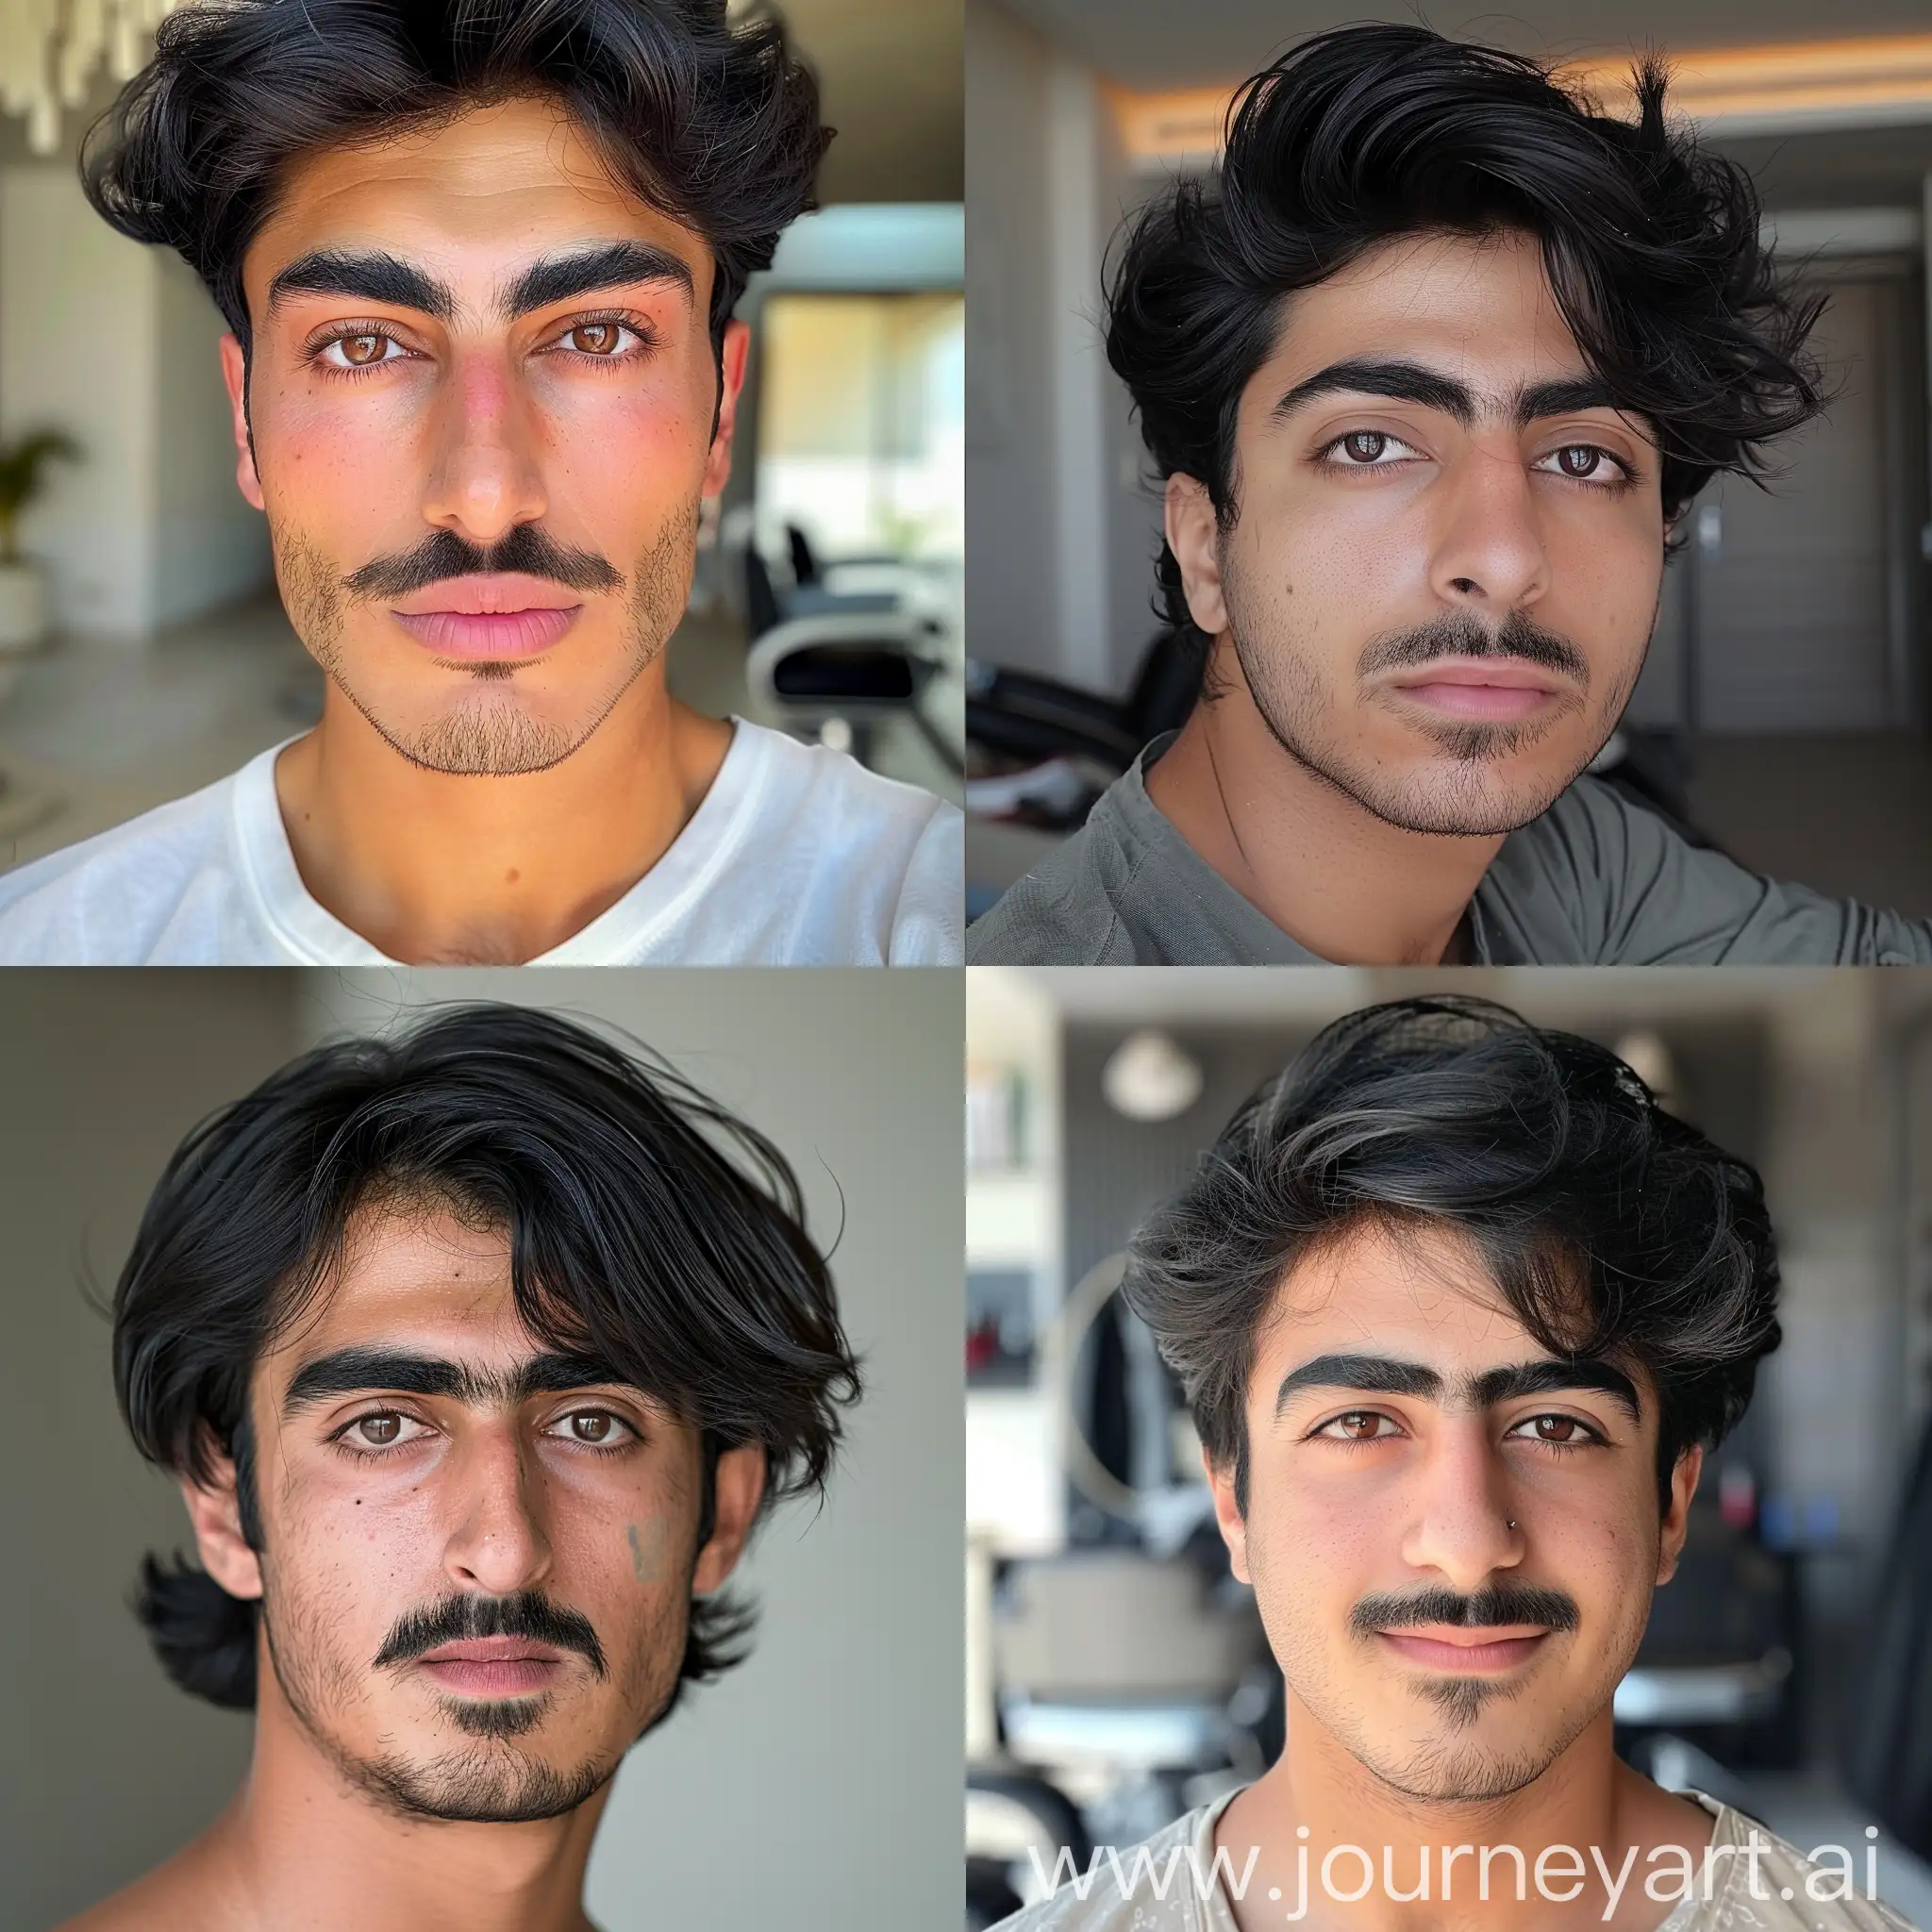 Stylish-Iranian-Hairdresser-in-Dubai-with-Tanned-Complexion-and-Mustache